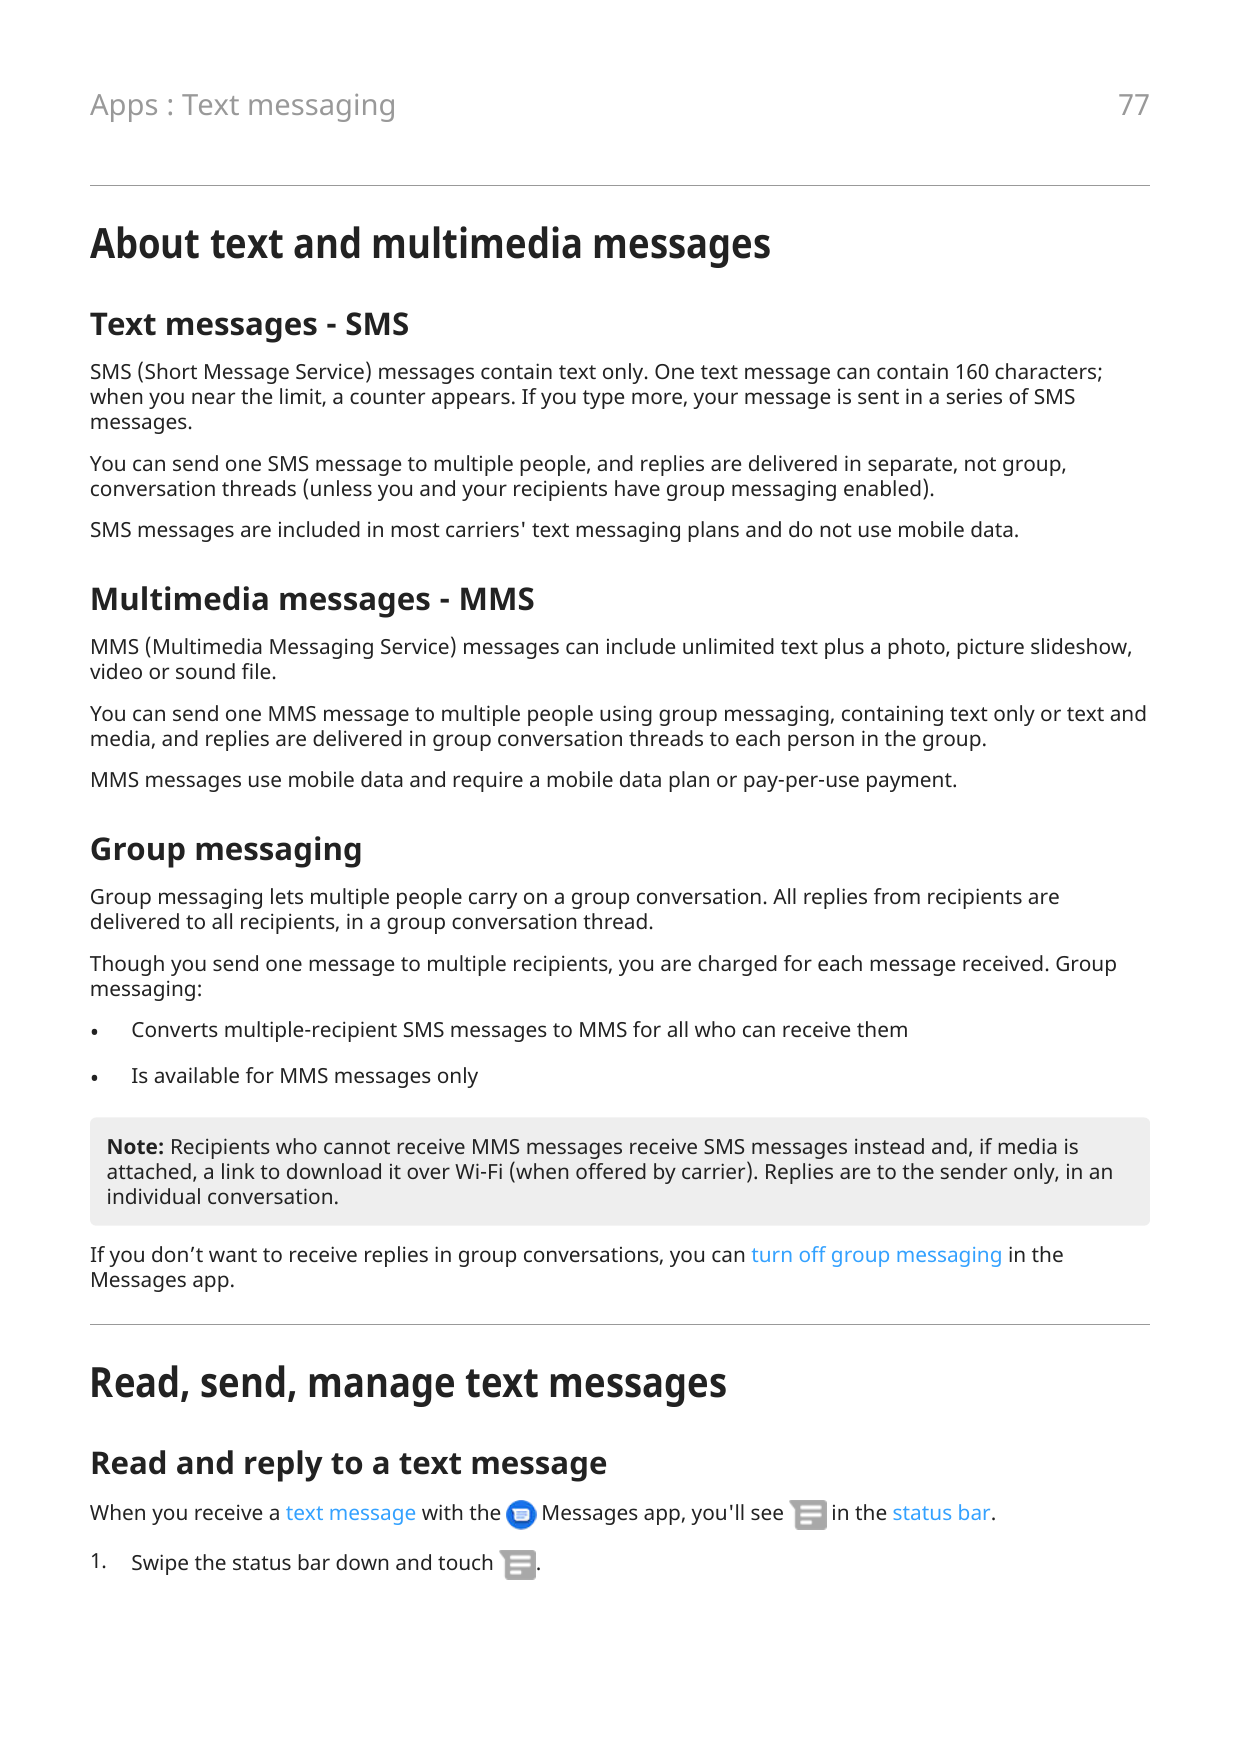 77Apps : Text messagingAbout text and multimedia messagesText messages - SMSSMS (Short Message Service) messages contain text on